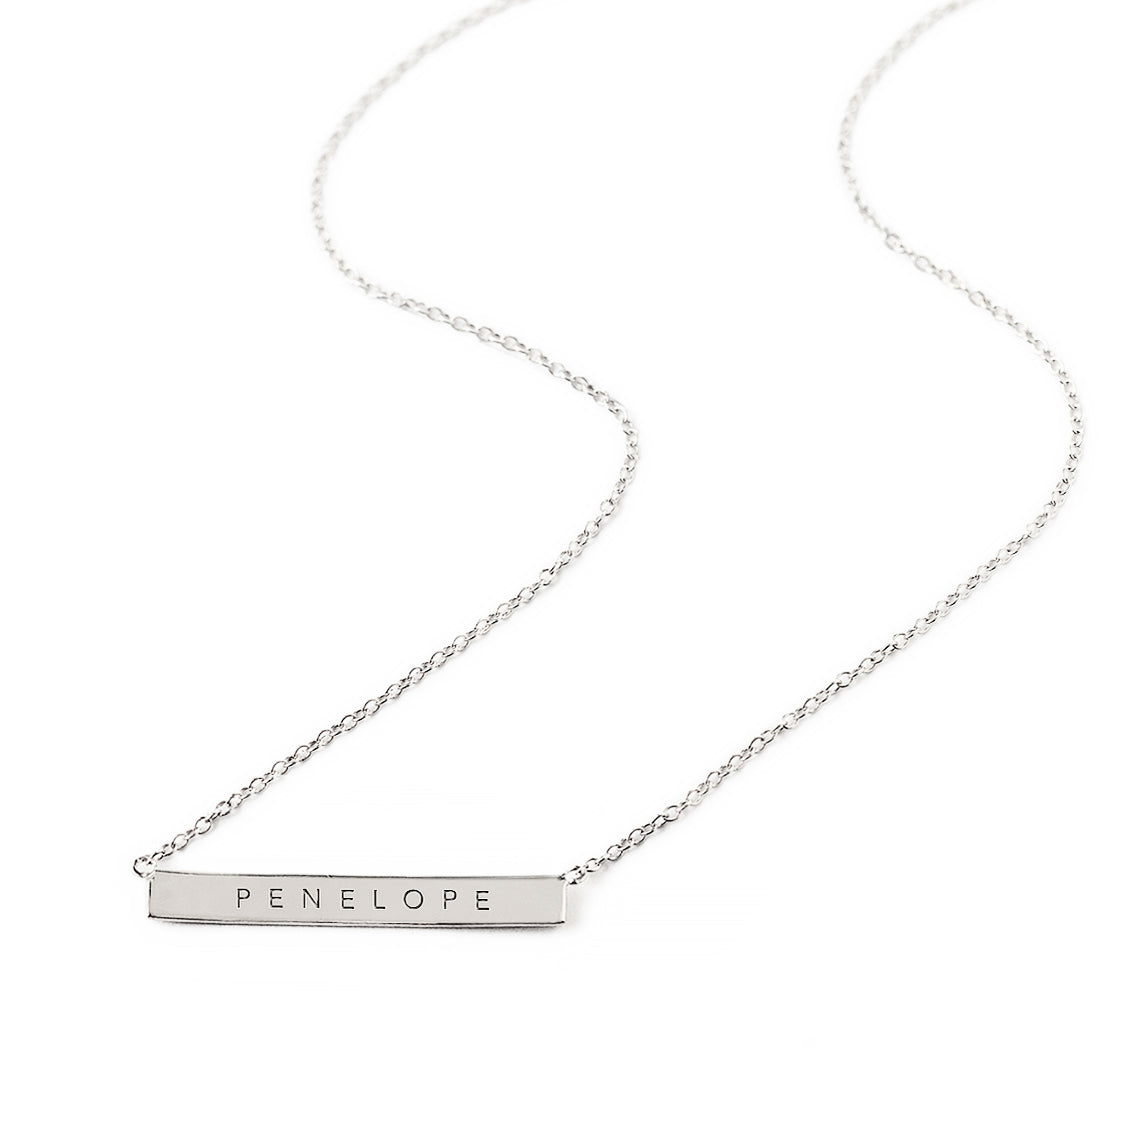 Fine Silver Bar Necklace, Silver Monogram Necklace, Personalized